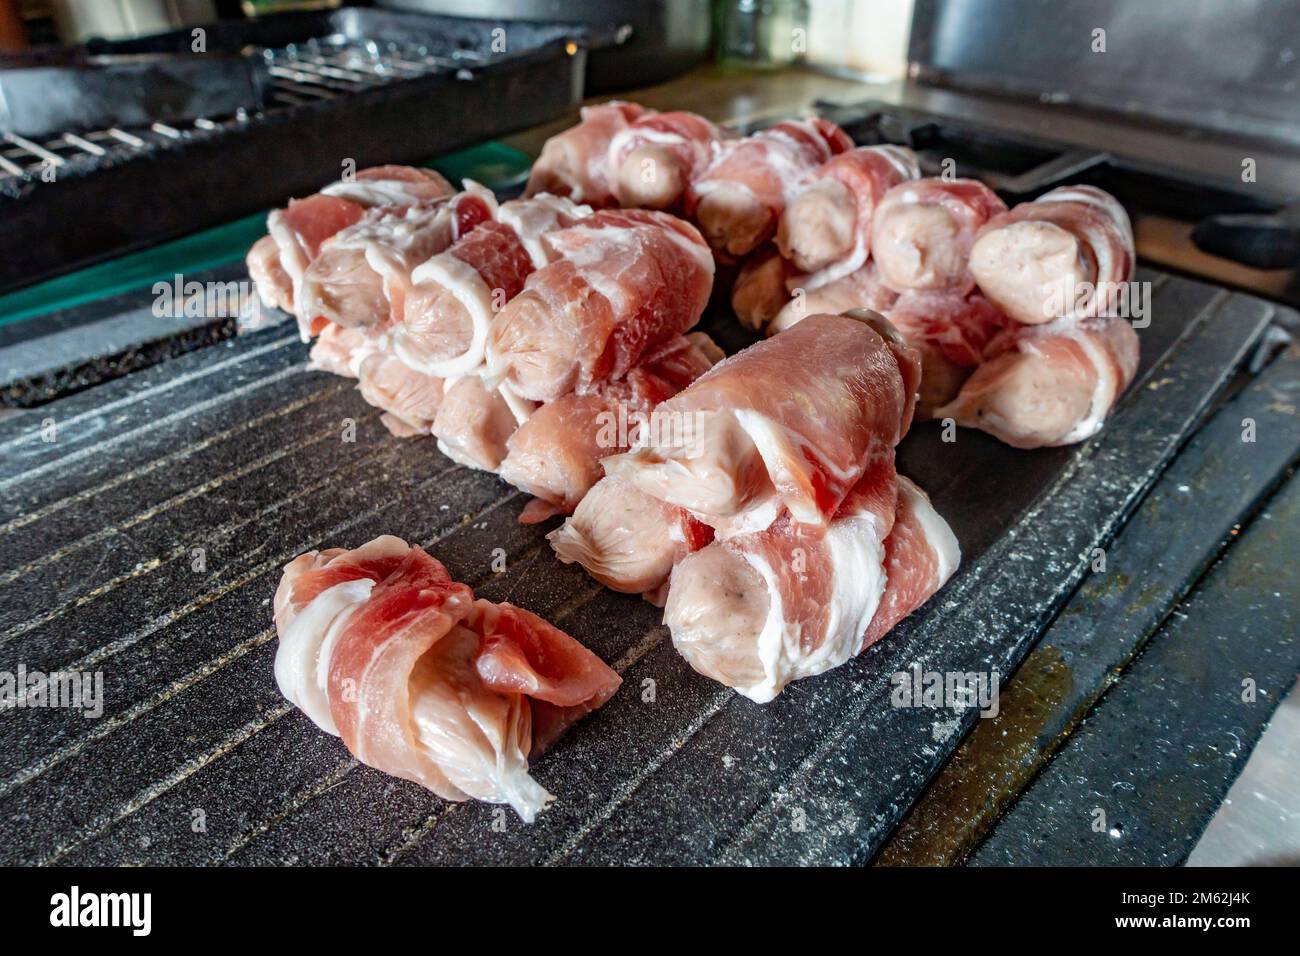 Frozen sausage wrapped in bacon or pigs in blankets defrosting ready to cook Stock Photo